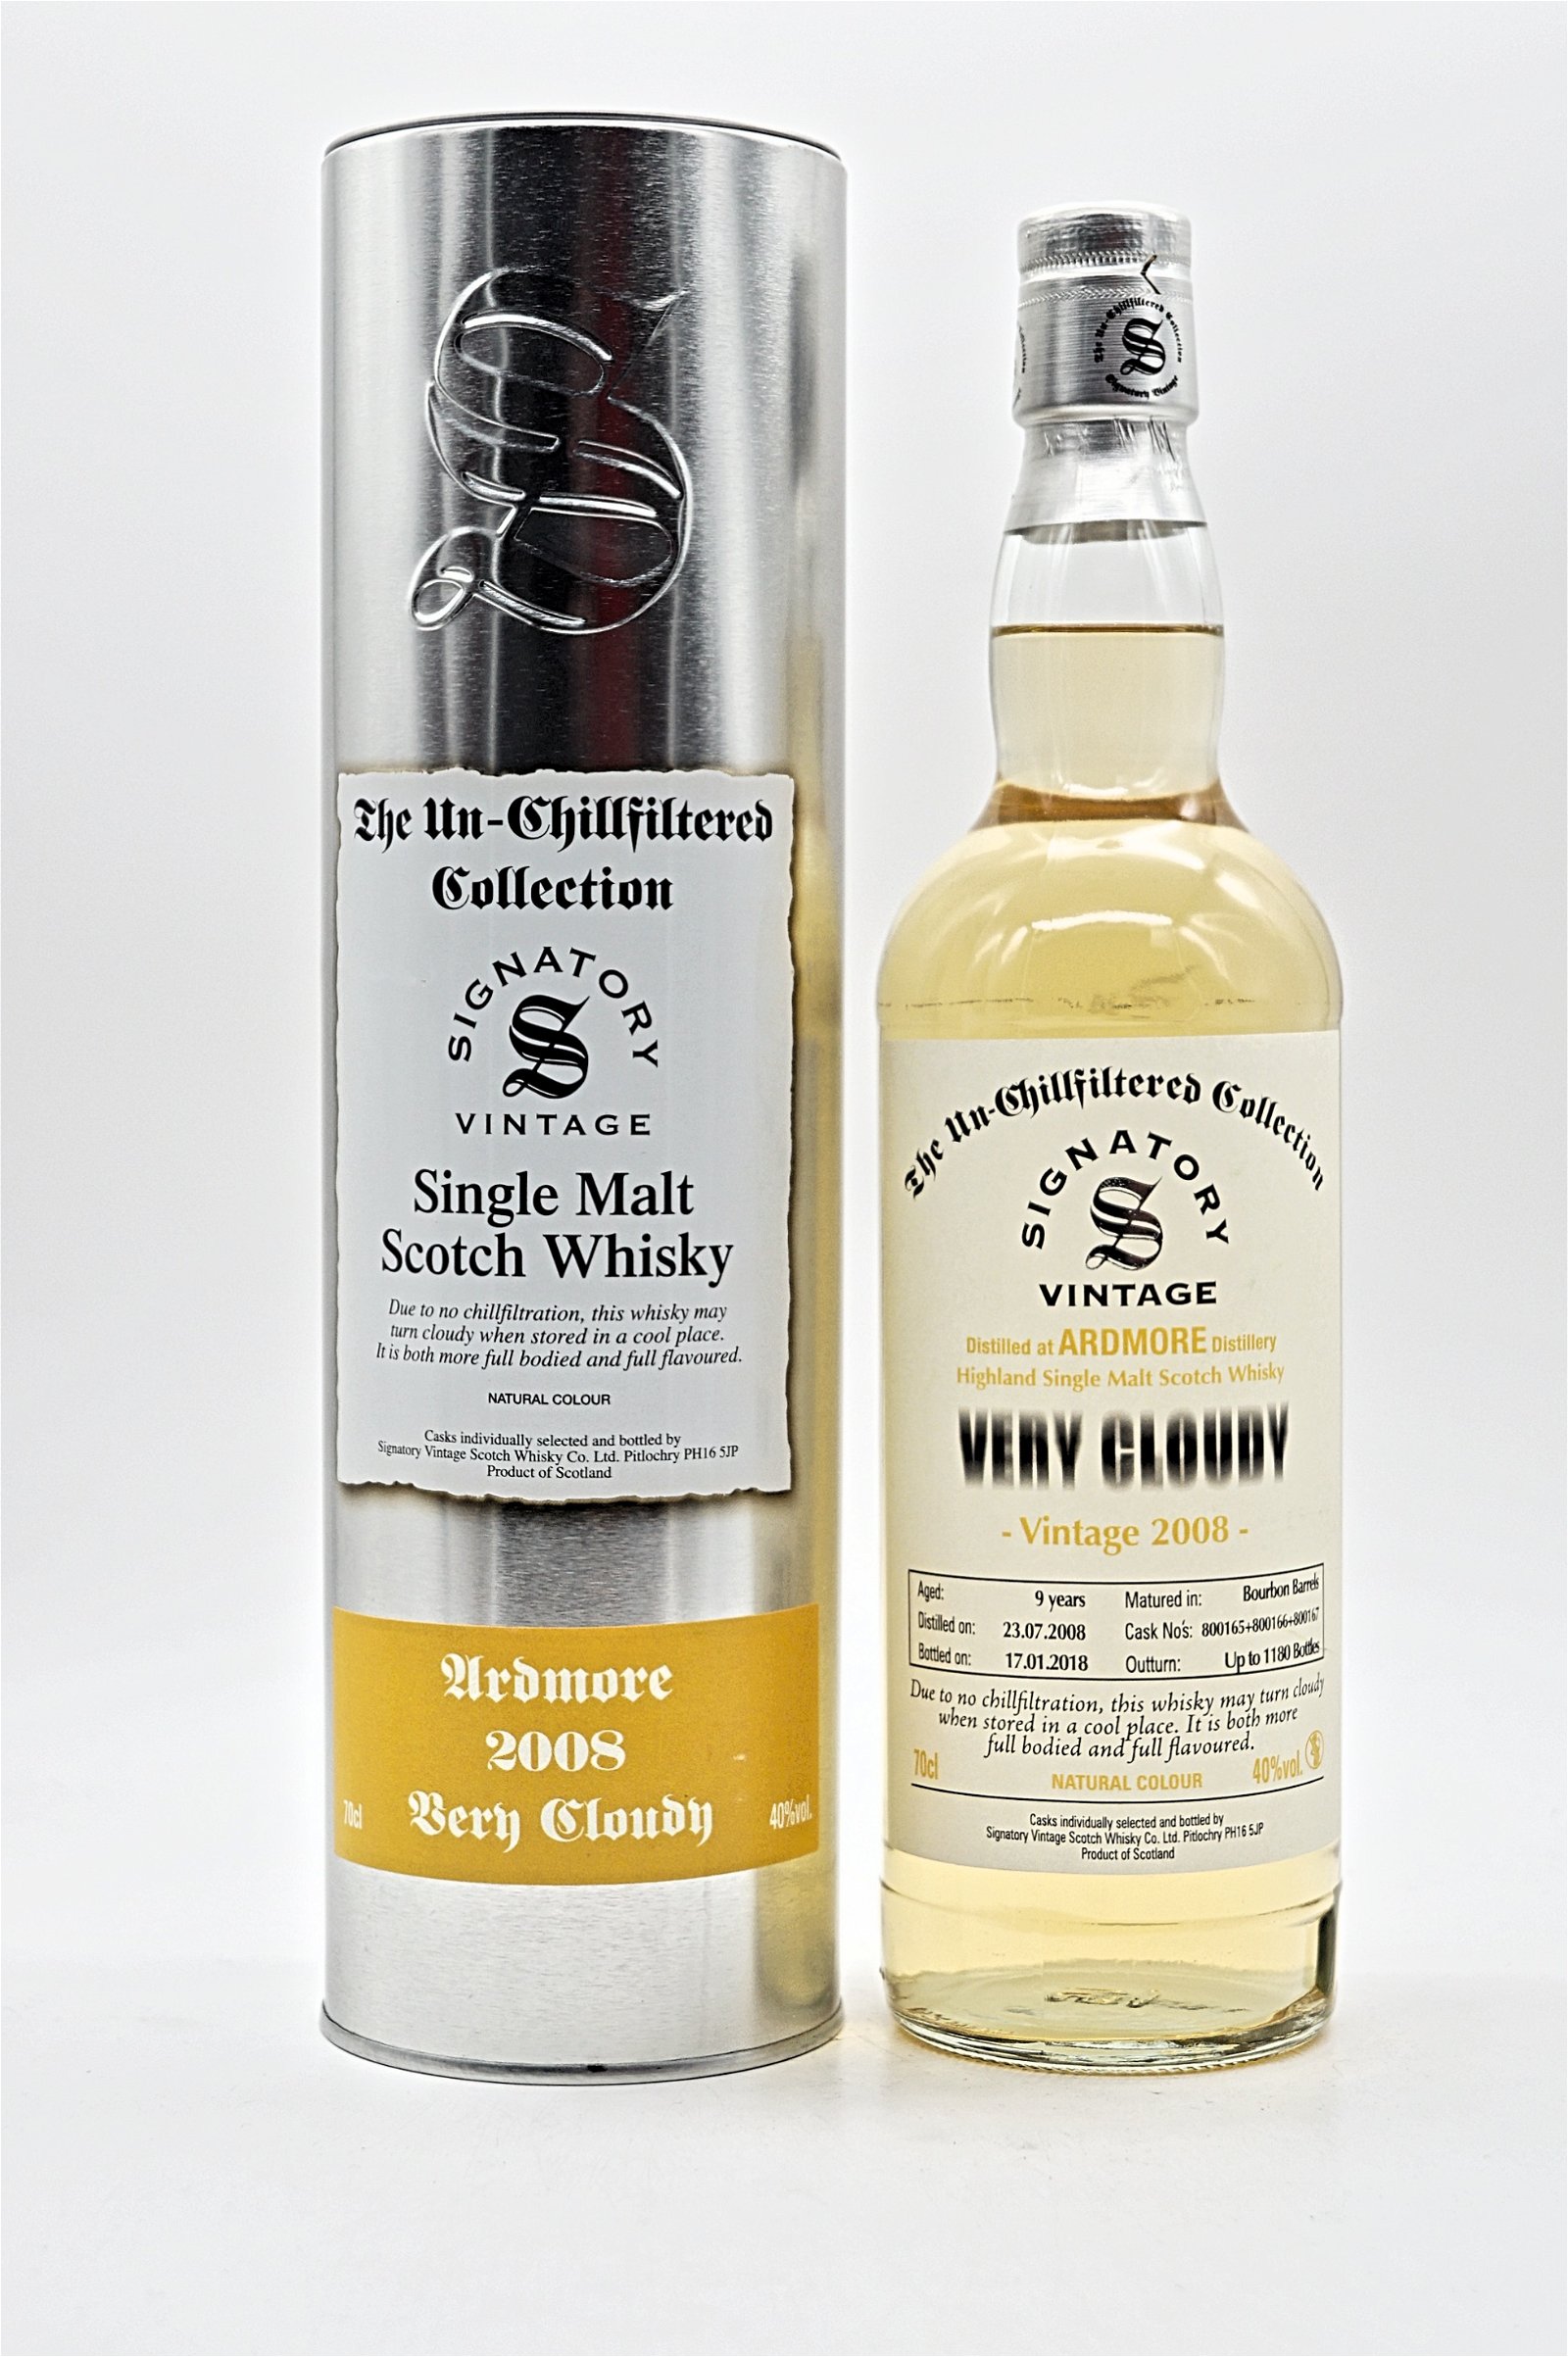 Signatory Vintage The Un-Chillfiltered Collection Ardmore Distillery Vintage 2008 Very Cloudy Highland Single Malt Scotch Whisky